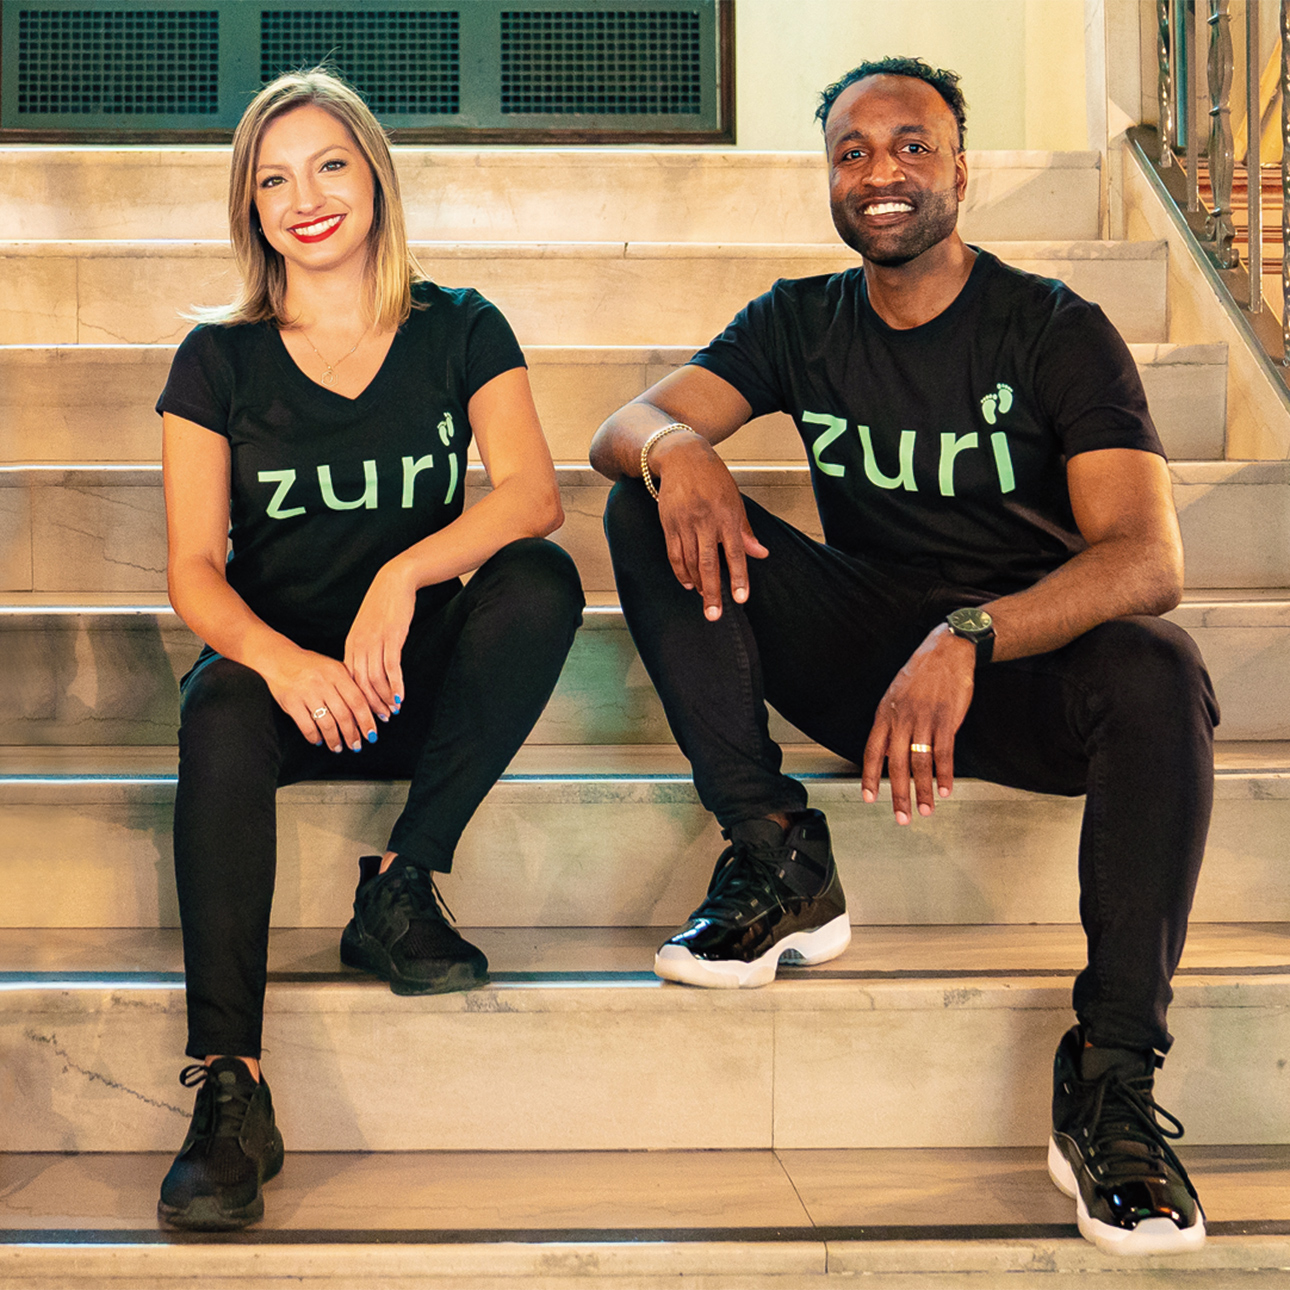 Giuliana Zaccardelli and Blair Matthews sit on steps next to each other smiling for a photo, both are wearing "Zuri" shirts.